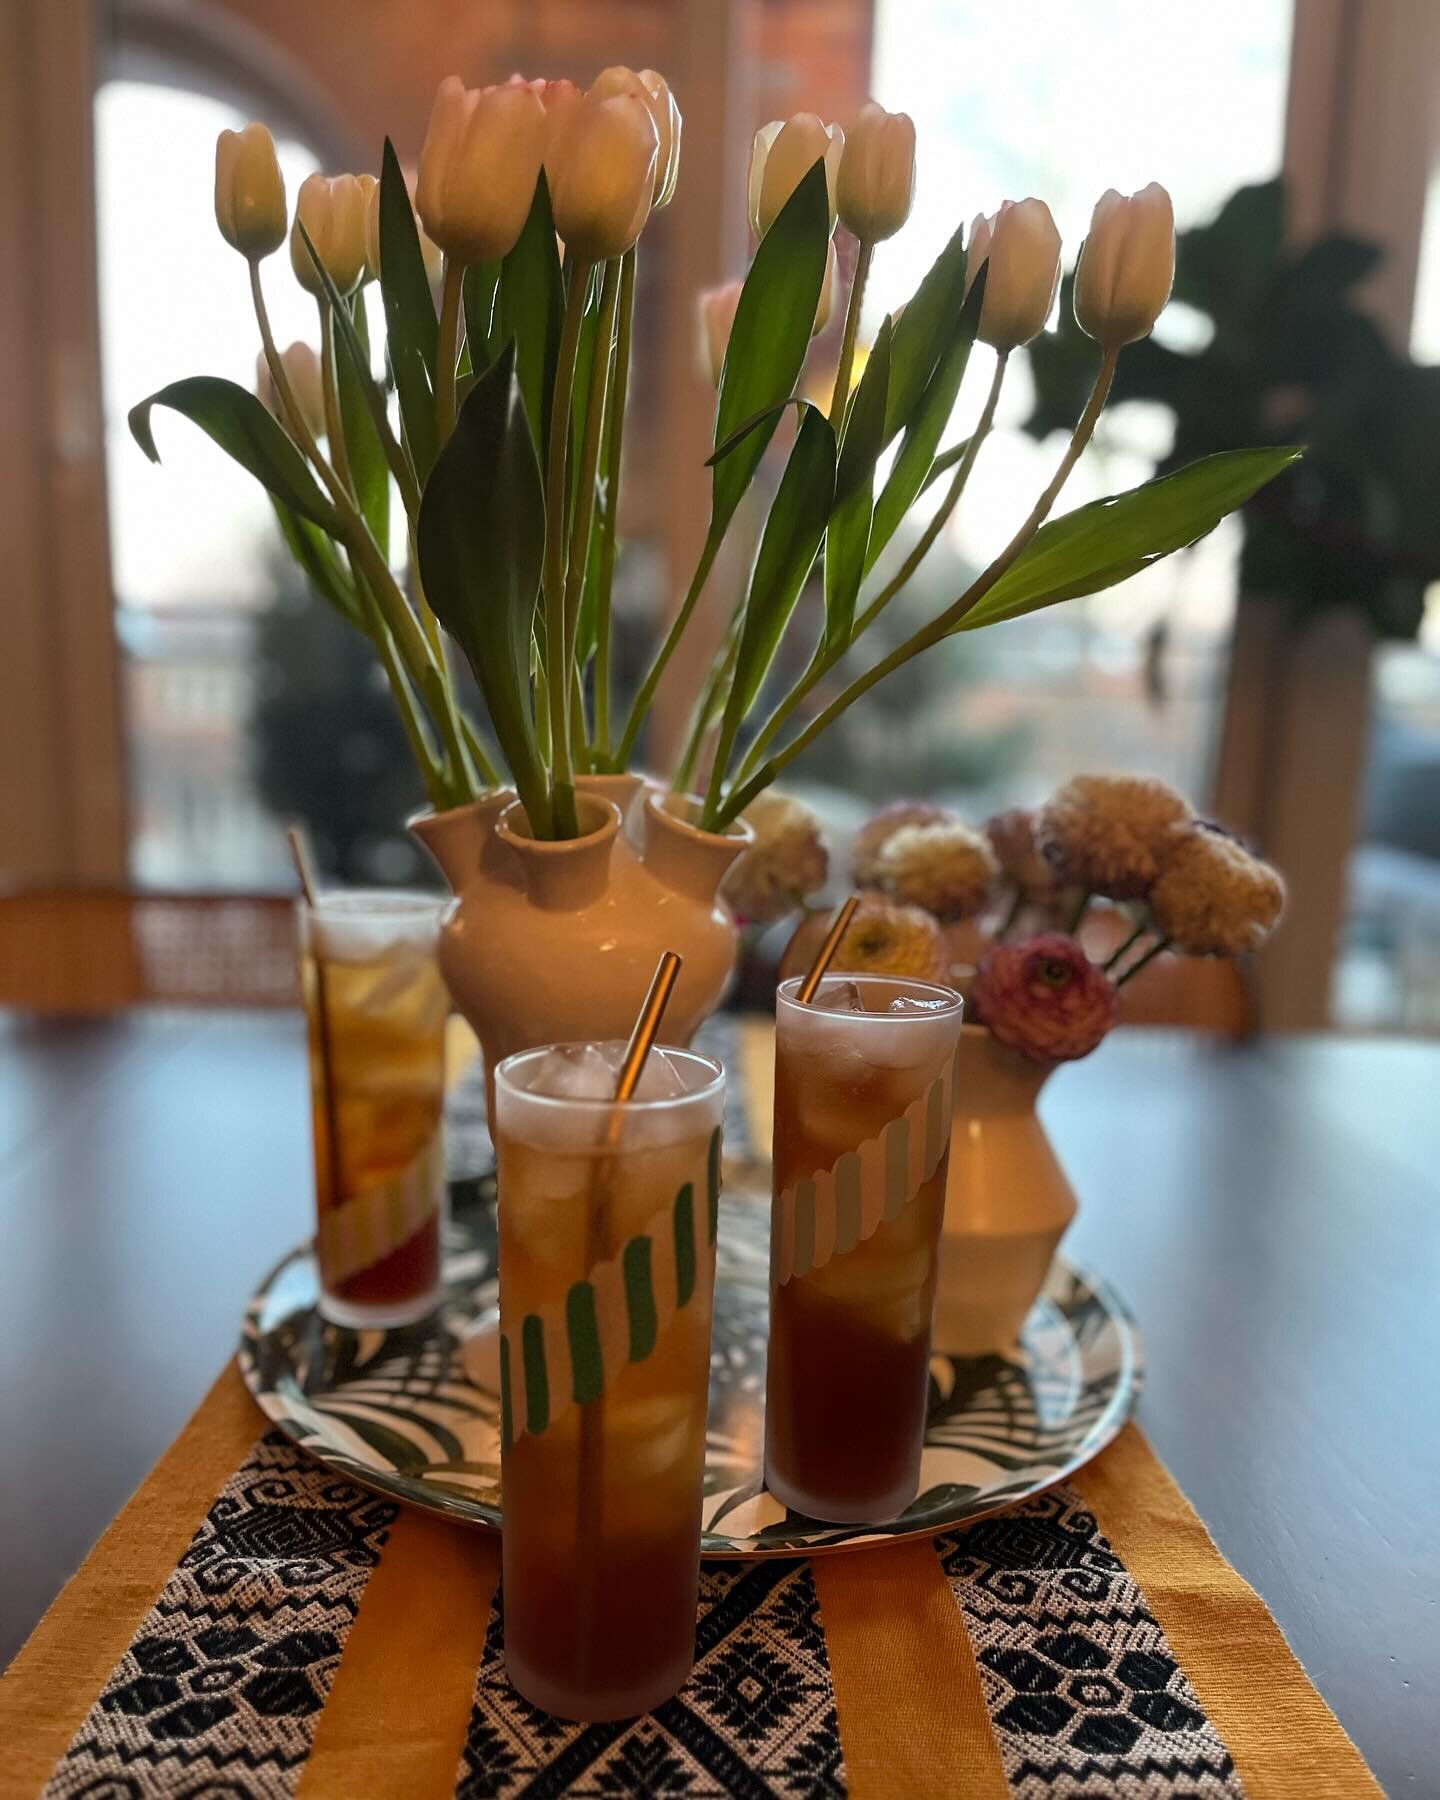 It&rsquo;s been a while, but here is a wishful spring cocktail. #tailoredtipples

Italian Buck

1 1/2 oz amaro
1 1/2 oz Cynar
3/4 oz lime juice
3 oz ginger beer

Add all of the ingredients, except the ginger beer to a shaker filled with ice and shake